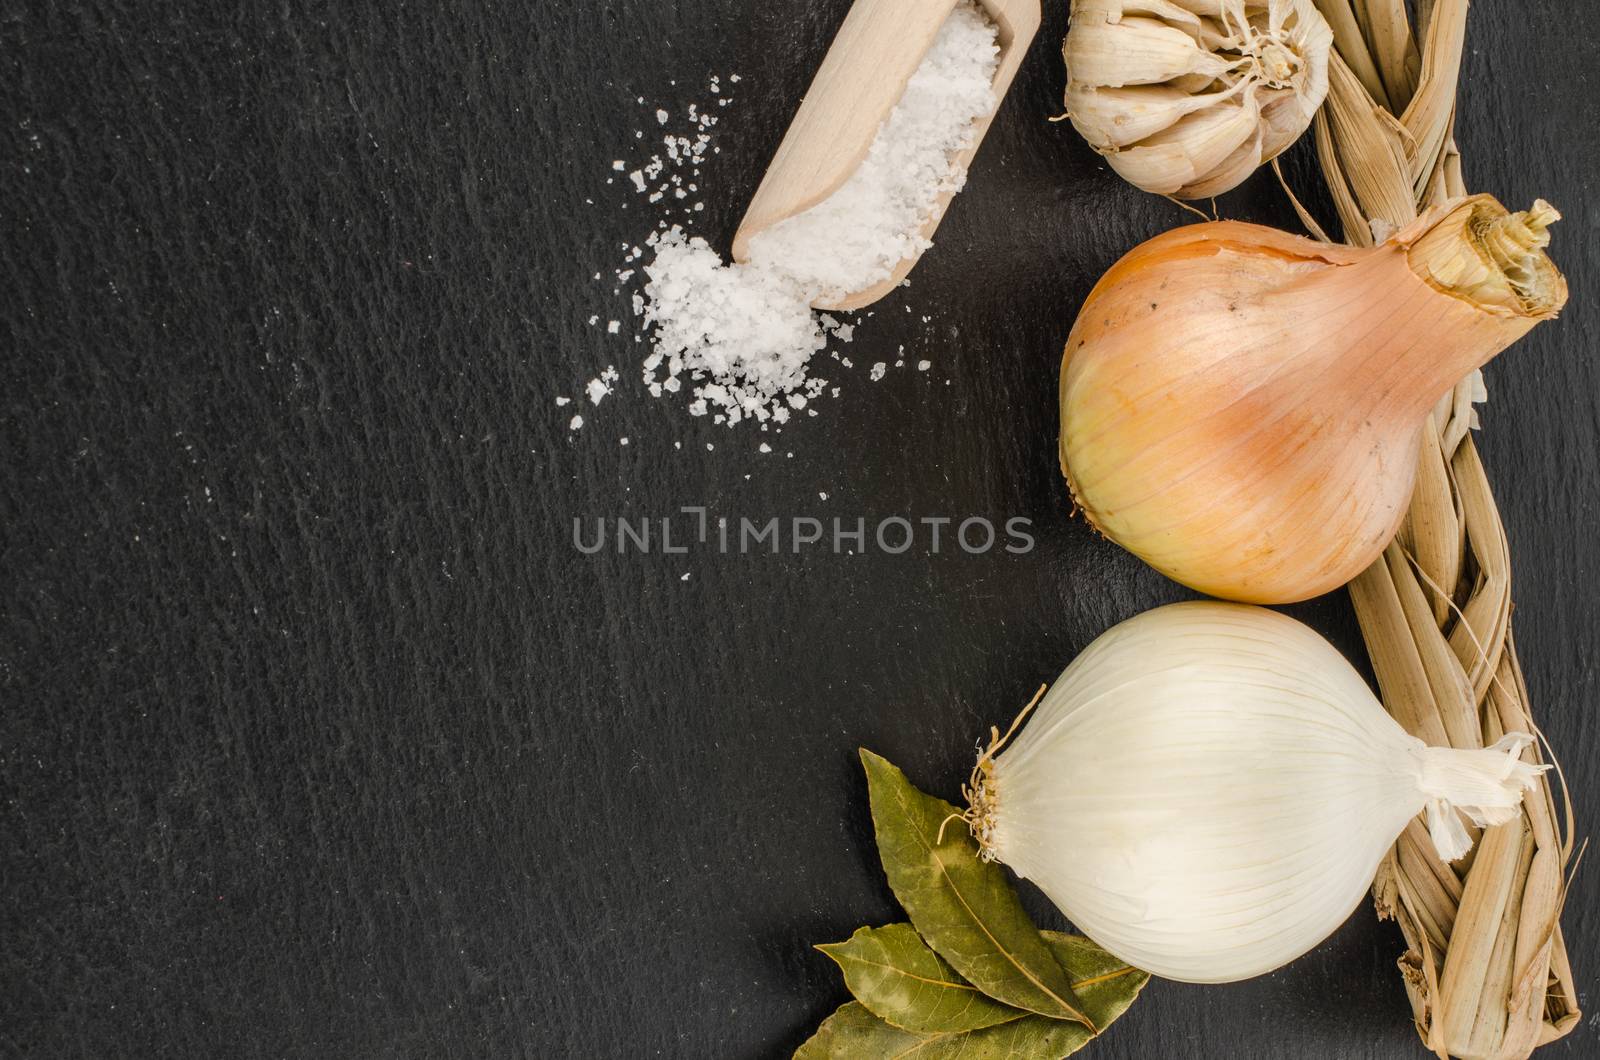 Garlic and onion by AnaMarques